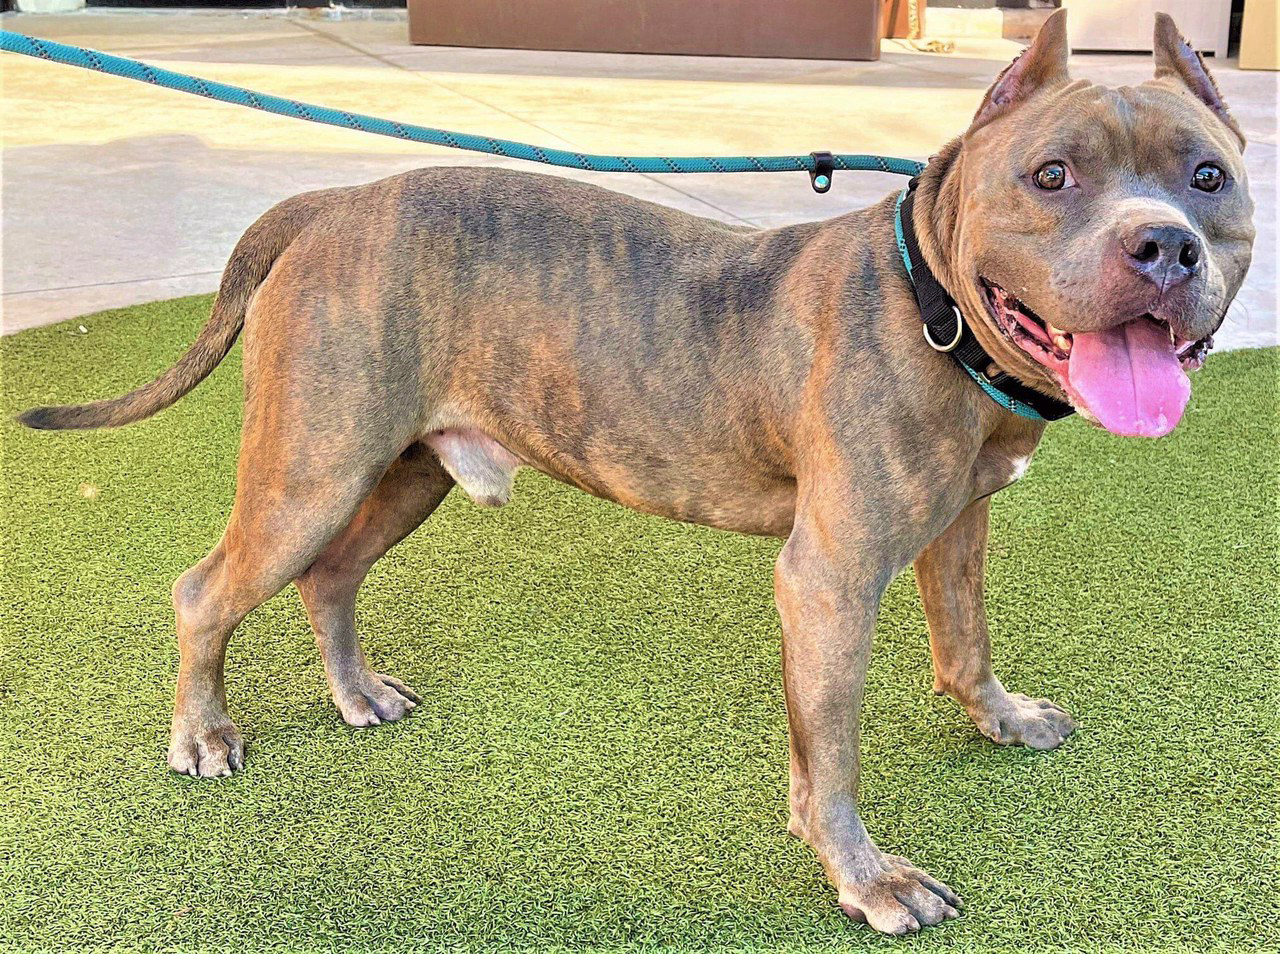 Now Living at Broward County Animal Care, Bayleef is Scared and Shy